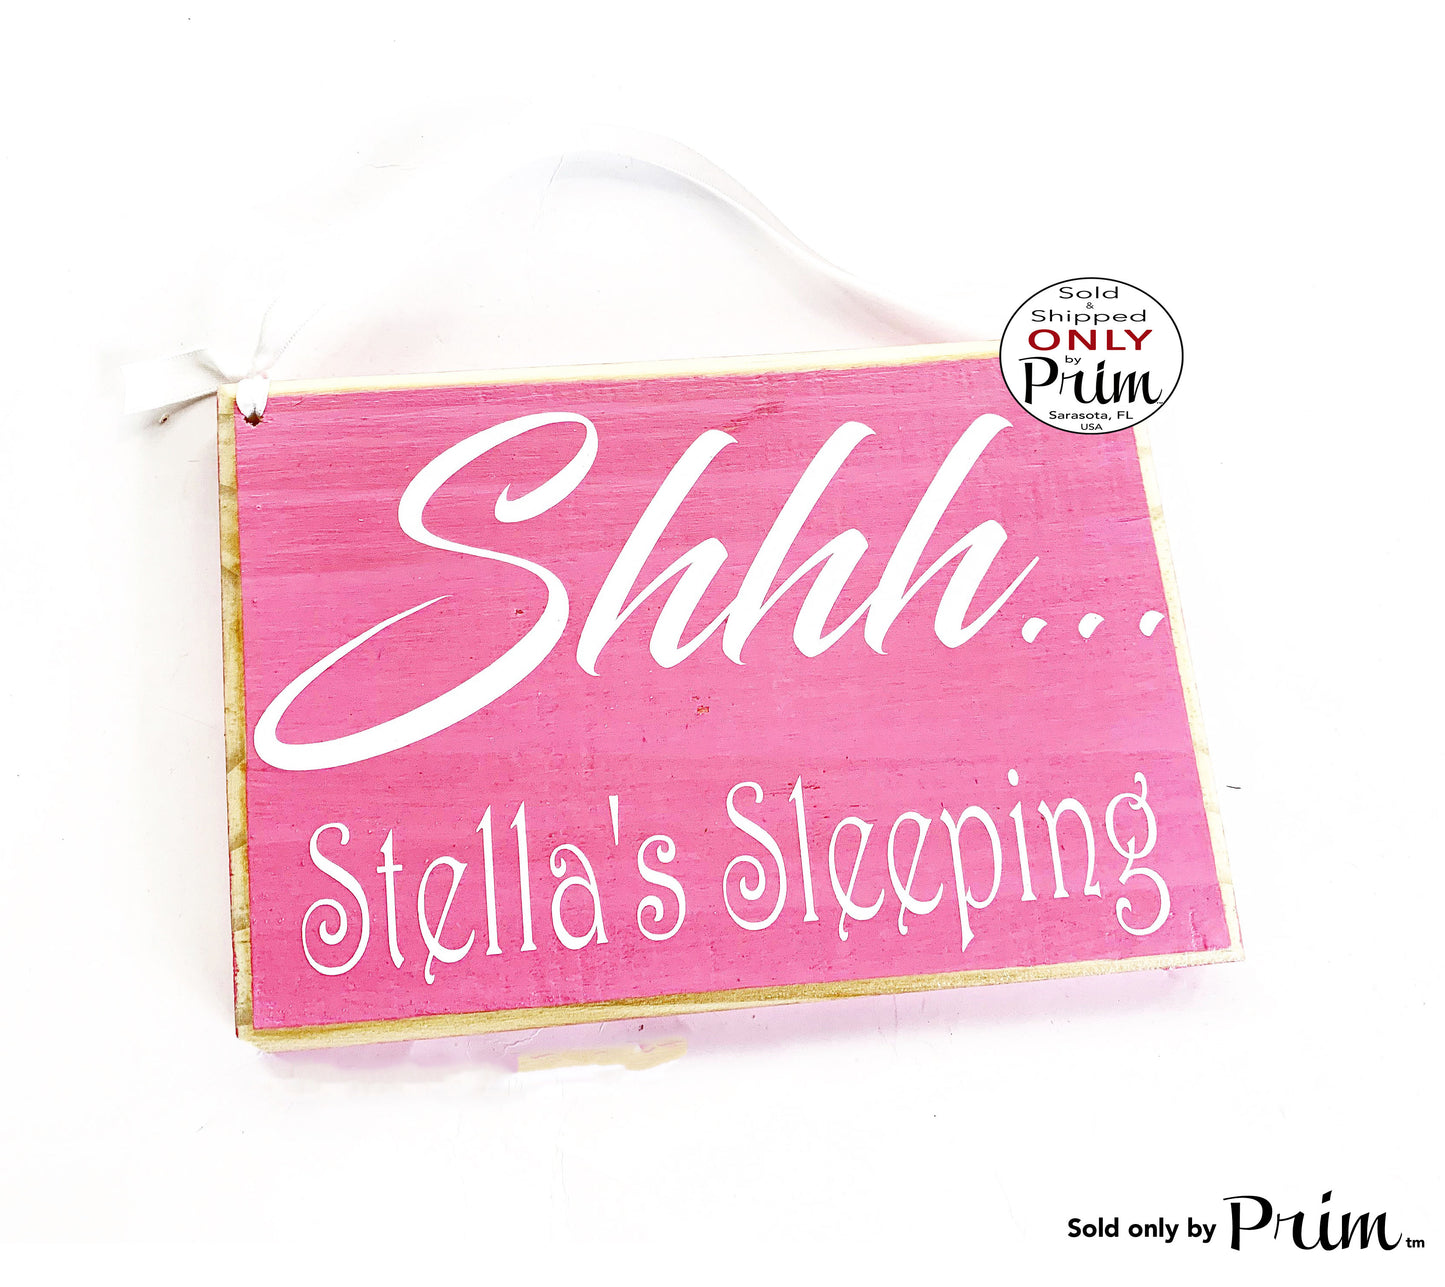 8x6 Shhh Baby Sleeping Custom Name Wood Sign, Nursery Baby Shower Gift, Birth Announcement,  Personalized Quiet Please Shhh Door Plaque